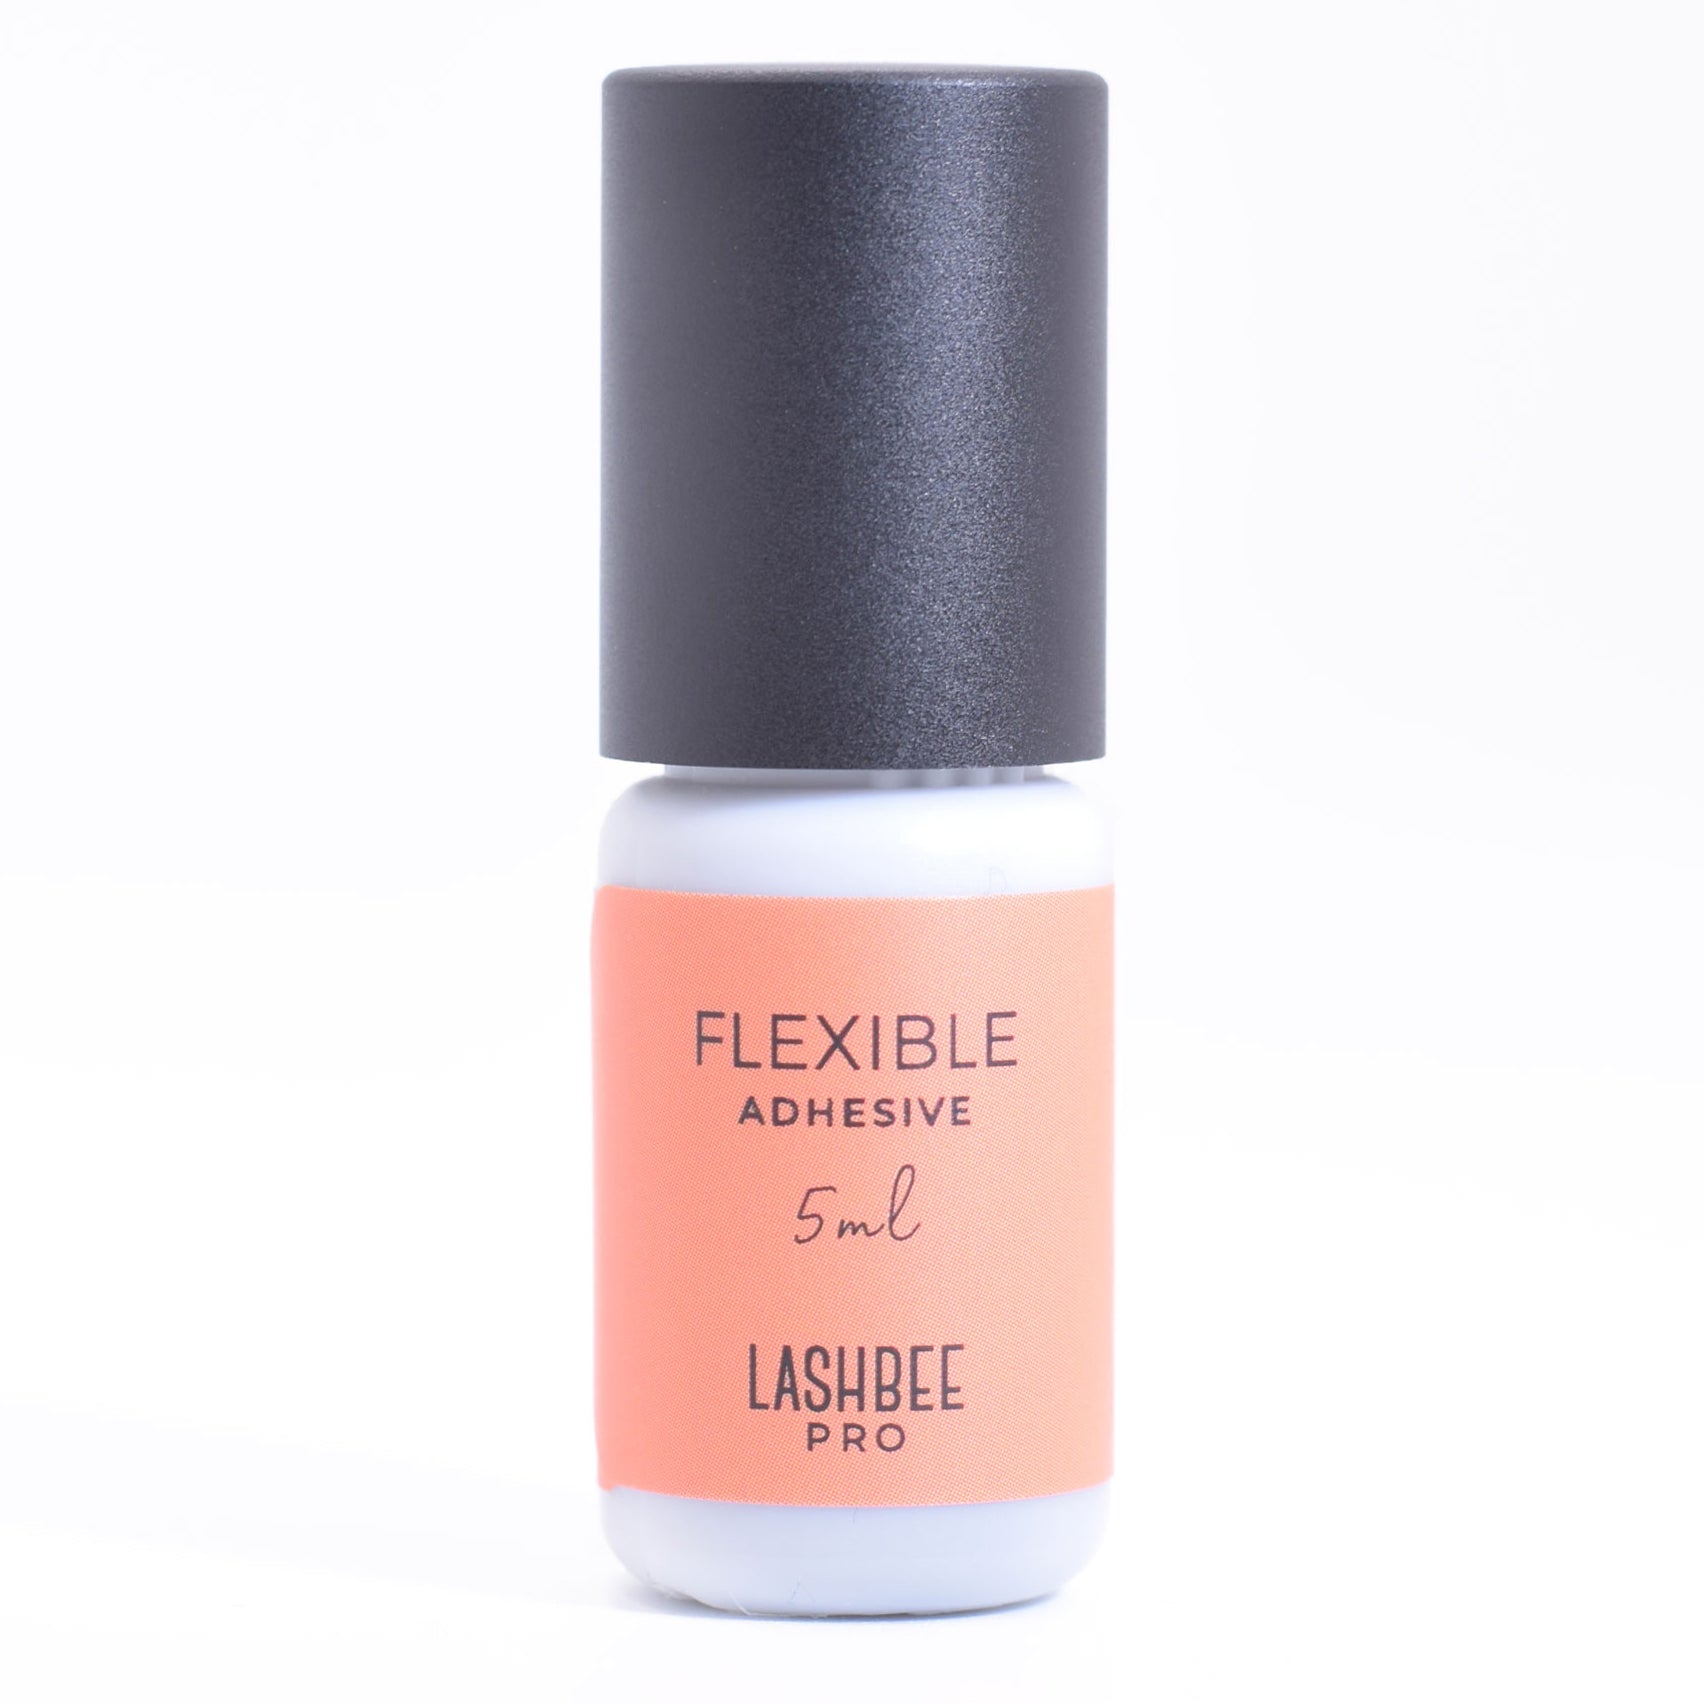 LashBeePro Flexible Adhesive for training in eyelash extensions - front of the orange bottle with black cap